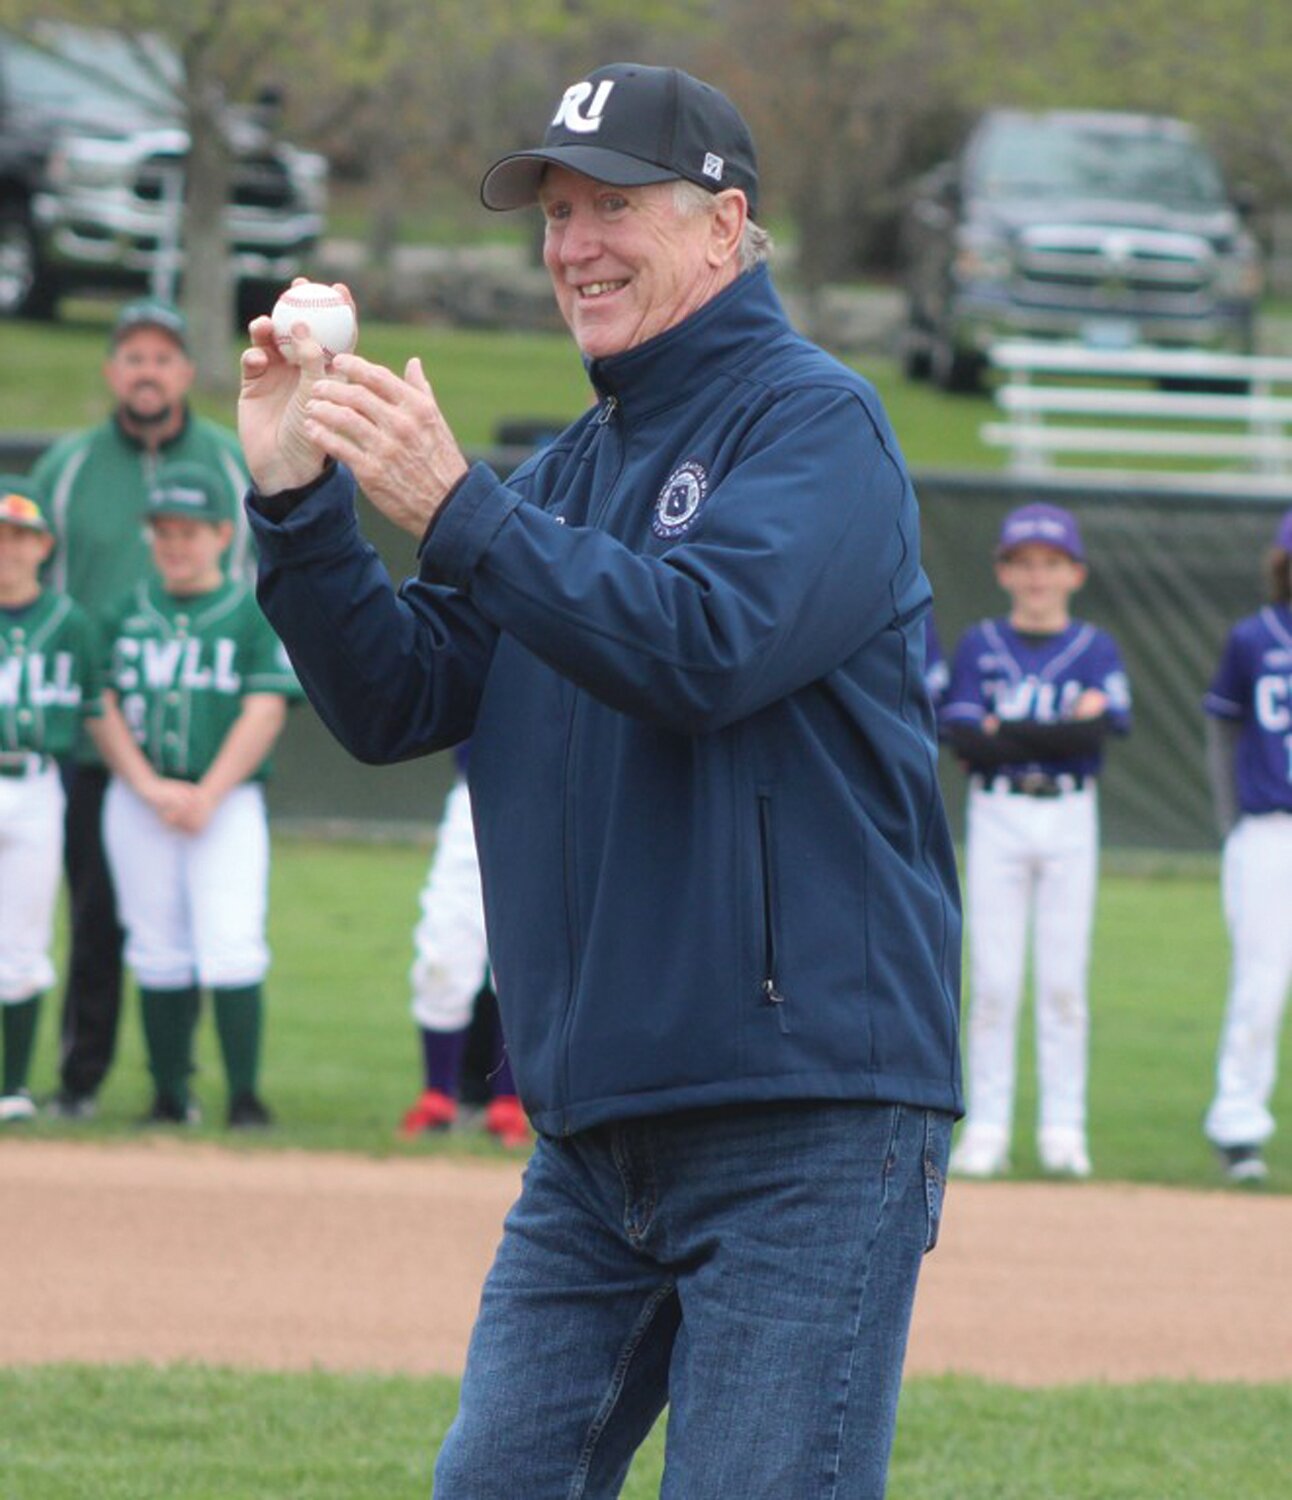 FIRST PITCH: Cranston Mayor Ken Hopkins throws out the ceremonial first pitch on Opening Day.